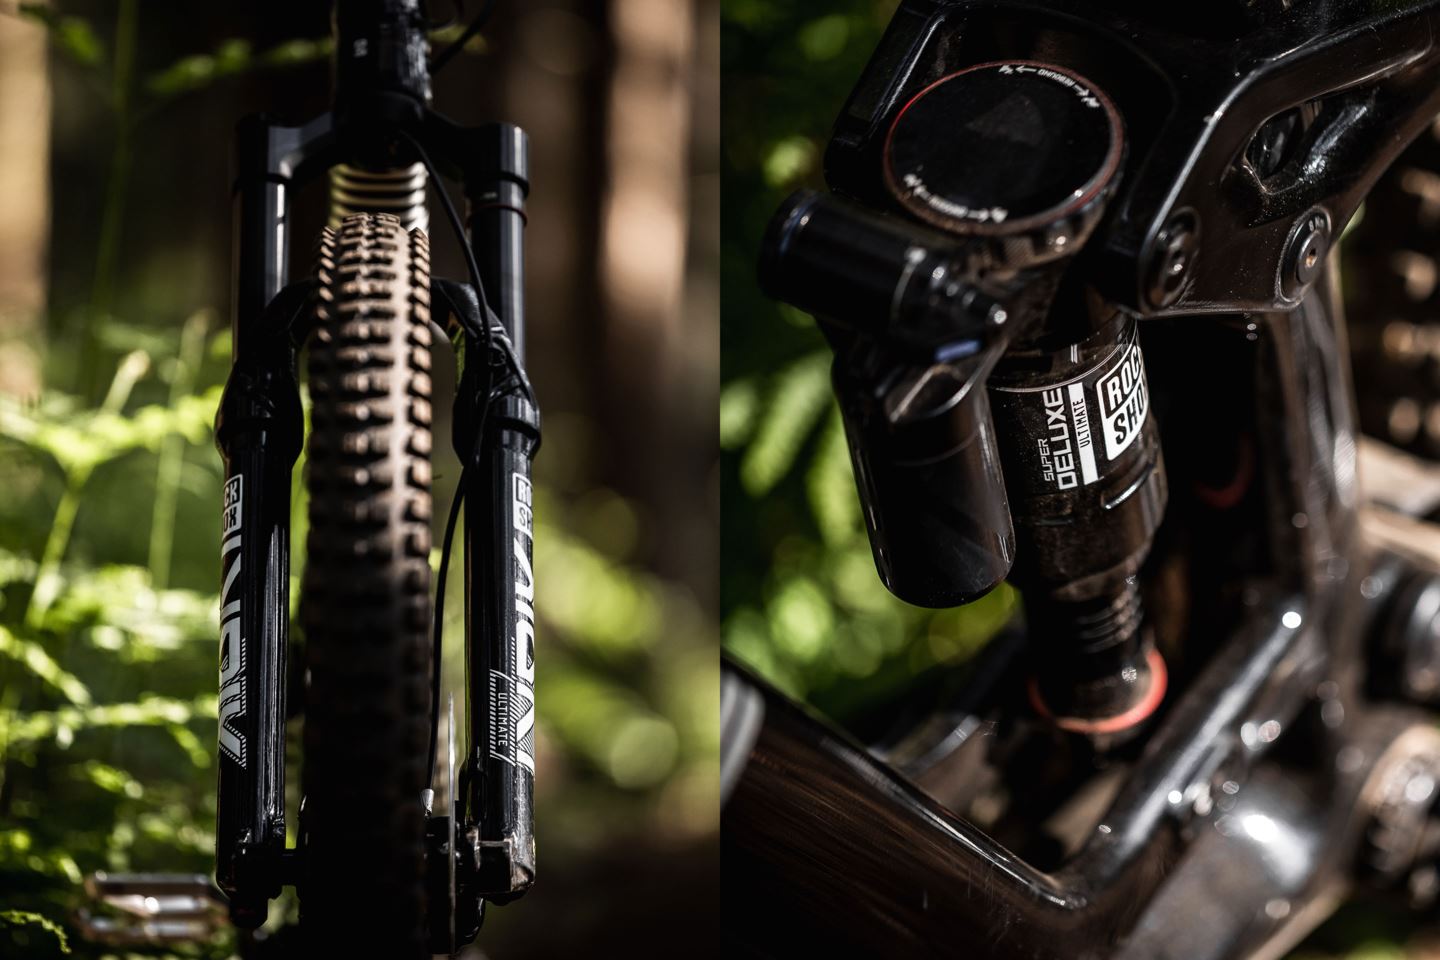 (Left) ) Close-up front view of lower legs on Lyrik Ultimate. (Right) Close-up of Super Deluxe Ultimate rear shock on Kade Edwards’ Trek Fuel EX.